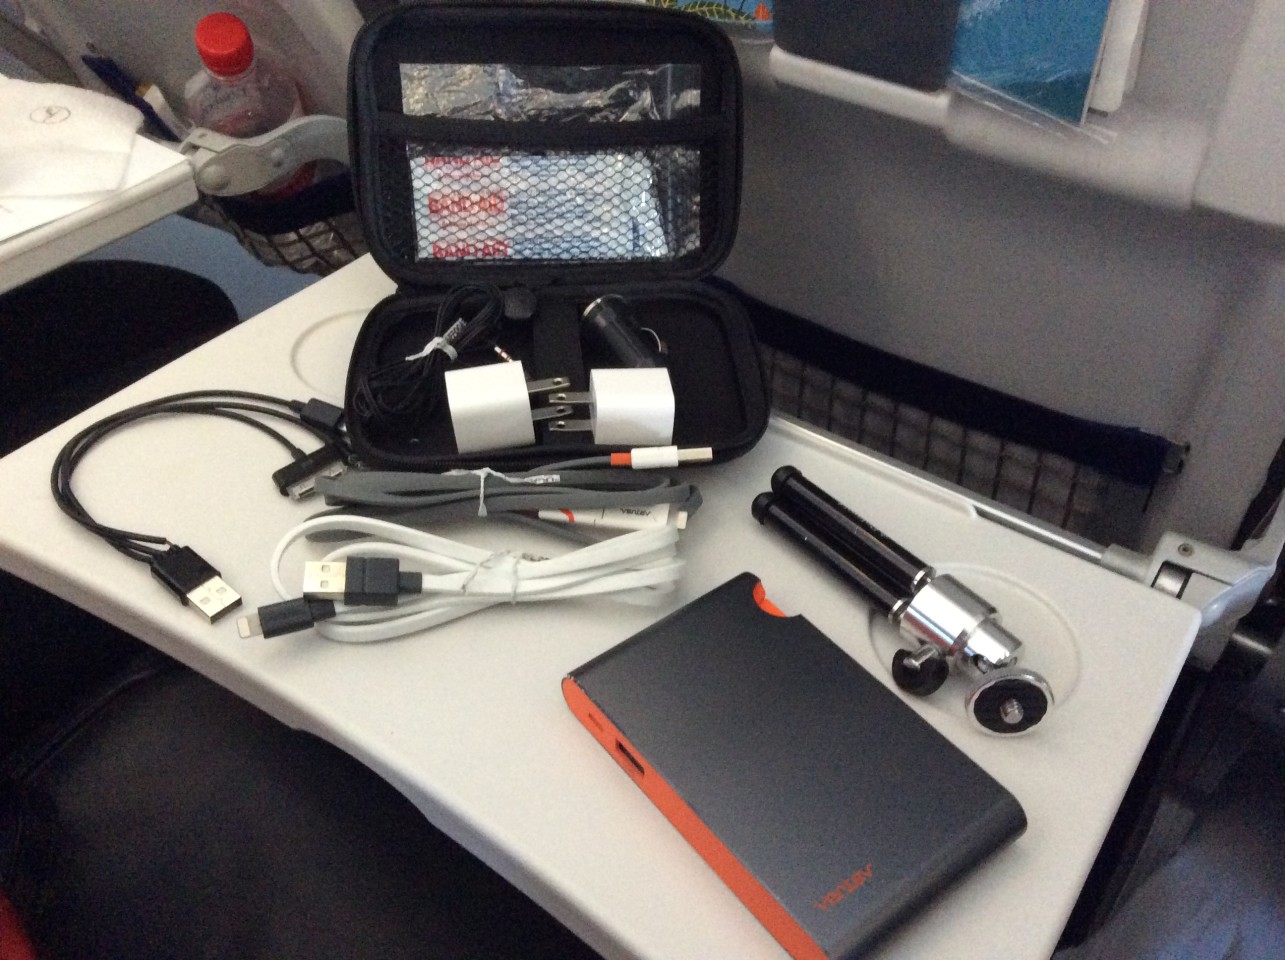 The Art of Travel Preparation ~ What's in my travel bag? Ventev mobile accessories and battery chargers are a must for us 